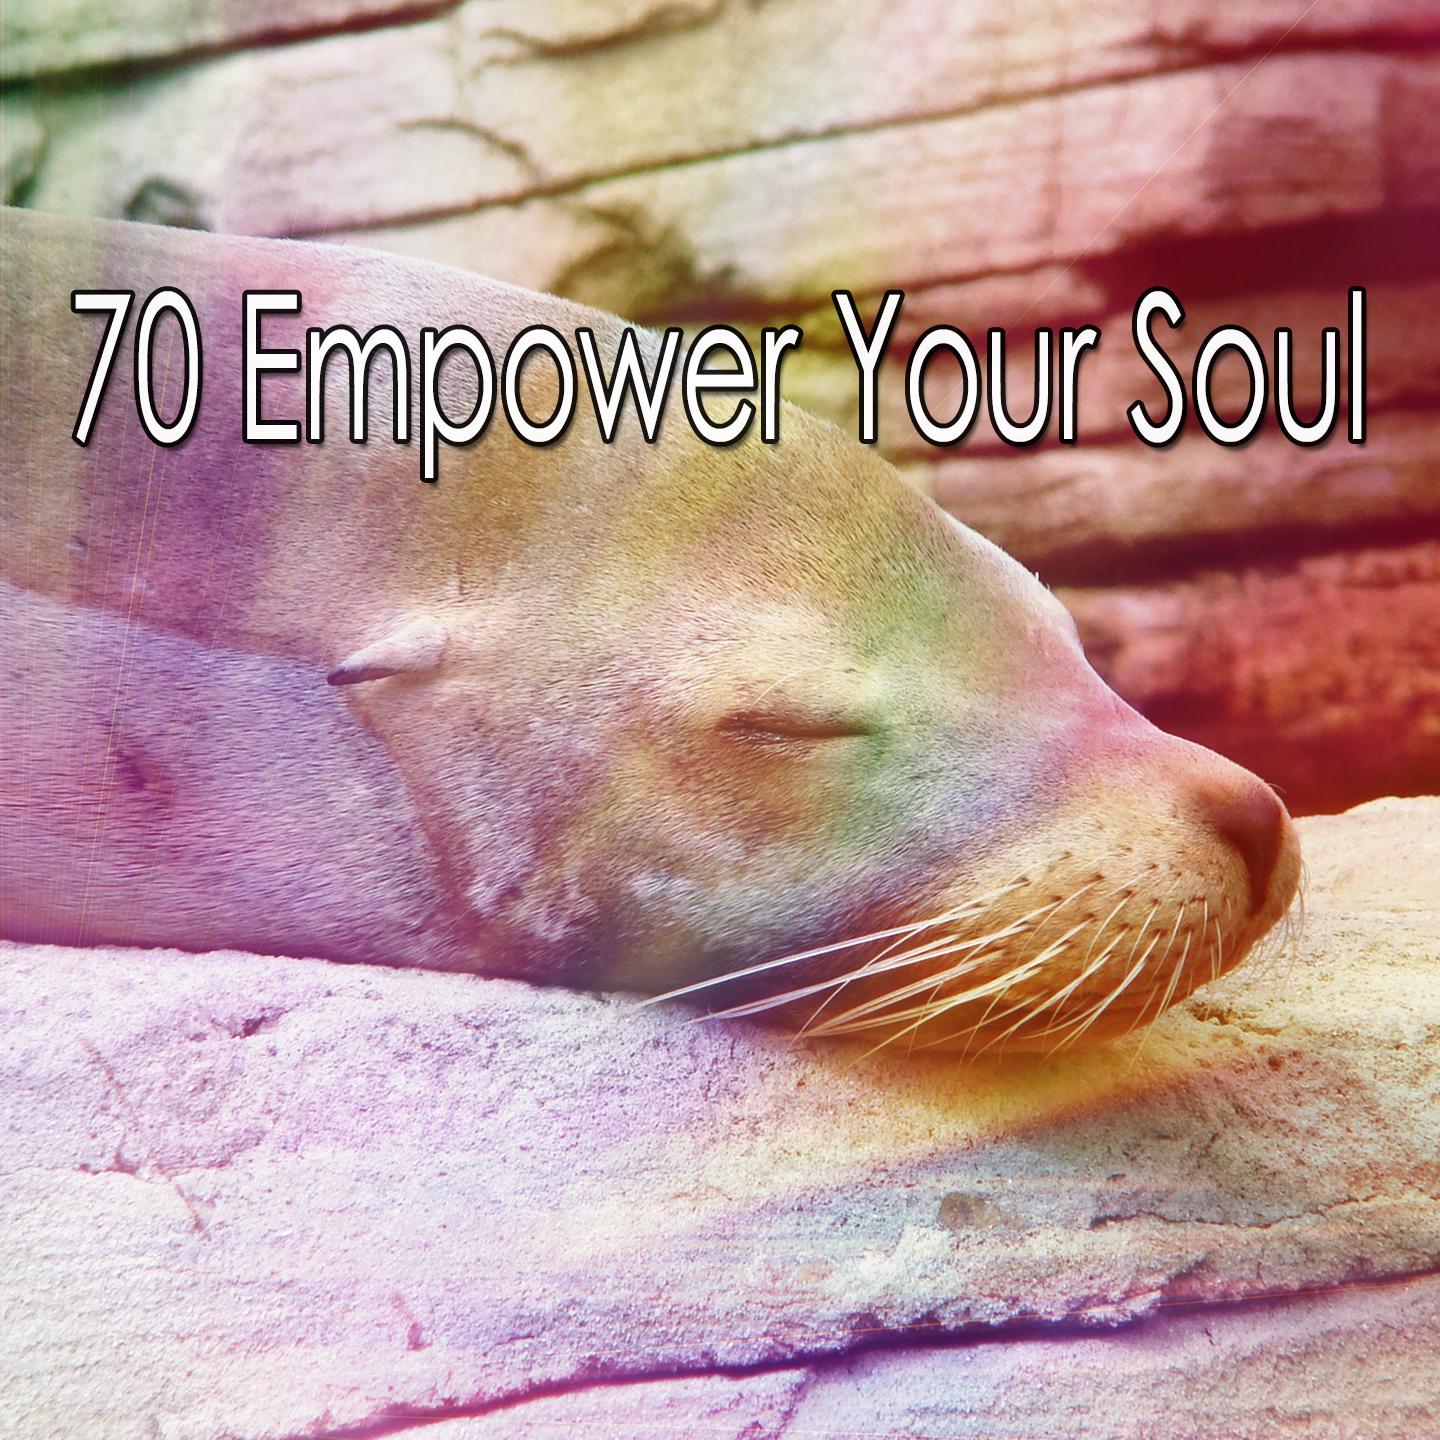 70 Empower Your Soul